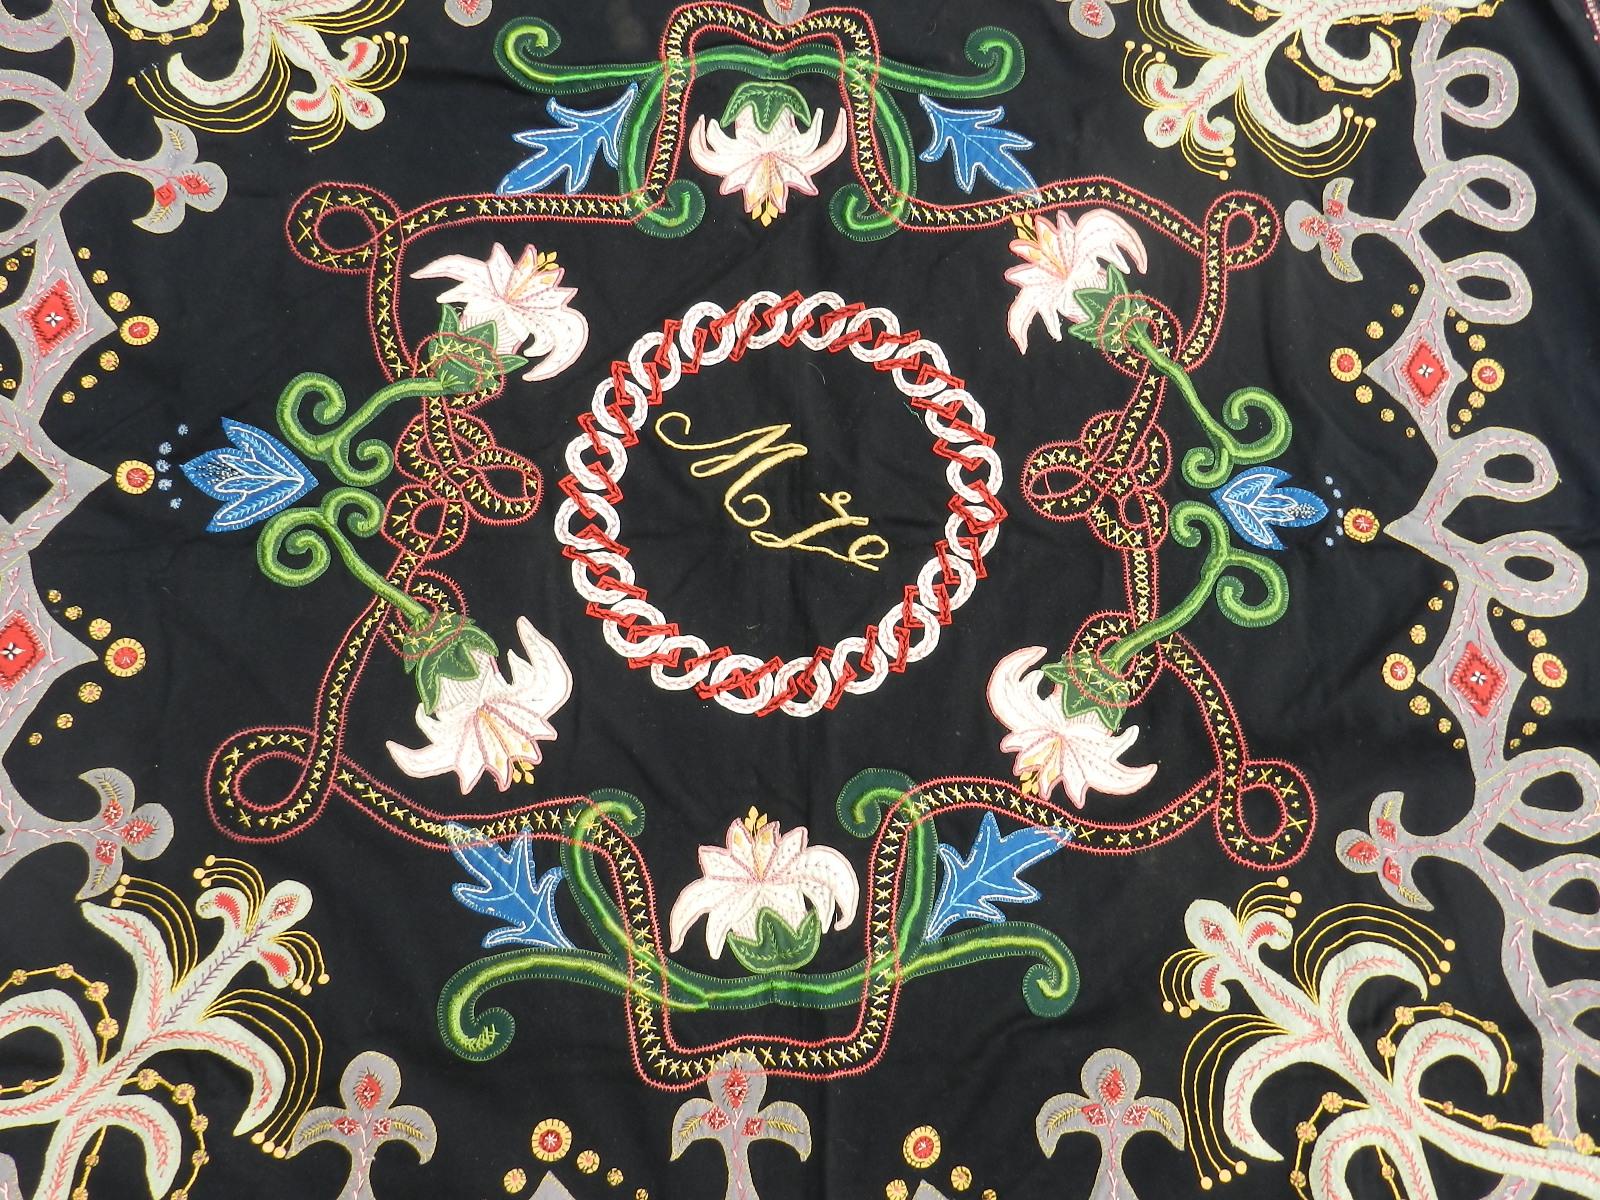 Hand embroidered cover or wall hanging French Basque Spanish circa 1900-1910 Belle Époque Art Nouveau
One of a kind
Exceptional and unusual design with central initials
Applique and with various embroidery stitches
Superb wall hanging
Chair or